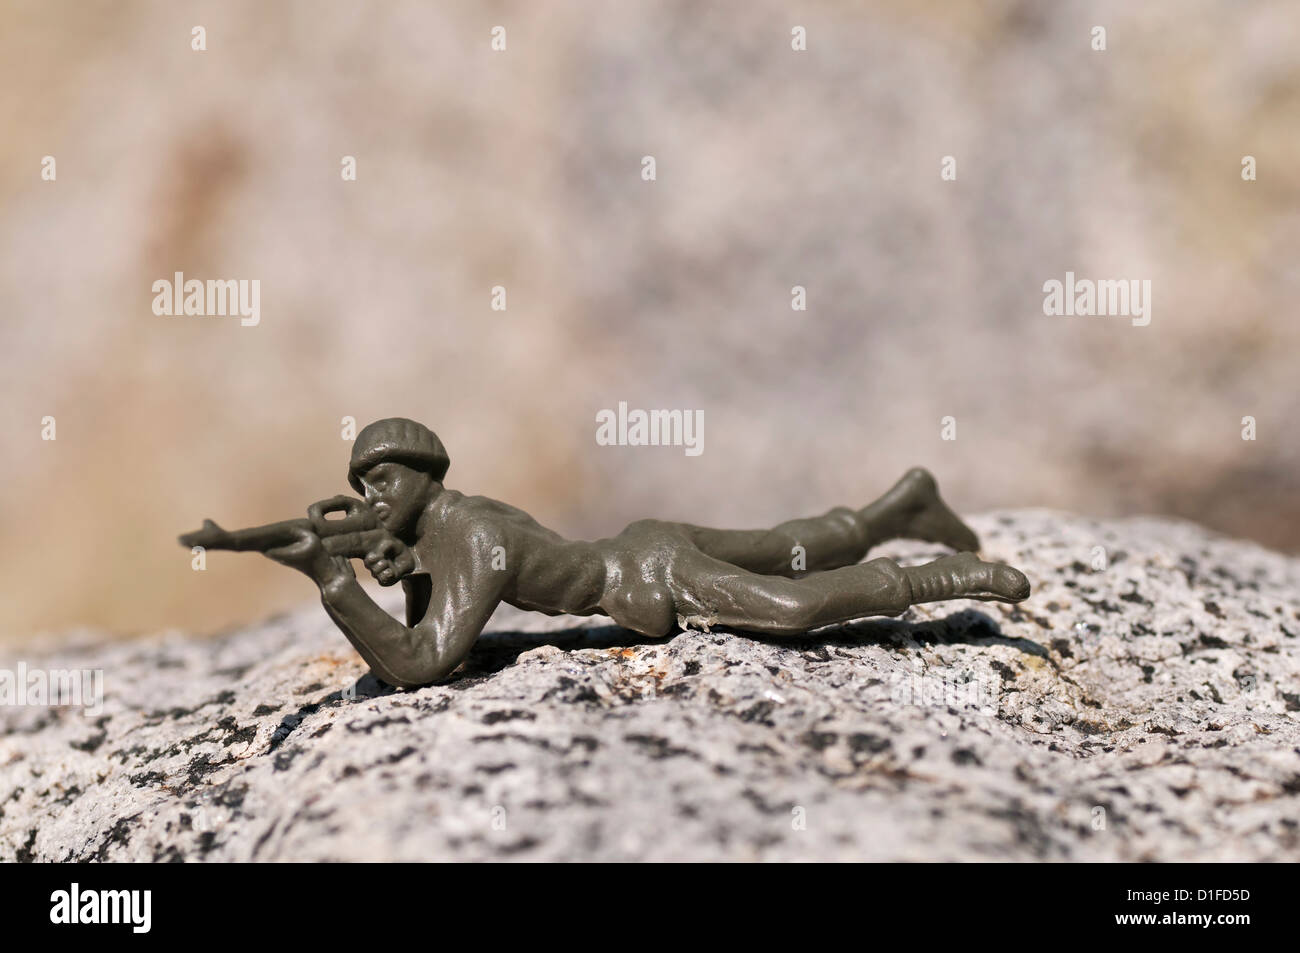 A green plastic toy soldier lies prone outdoors while aiming his rifle. Stock Photo